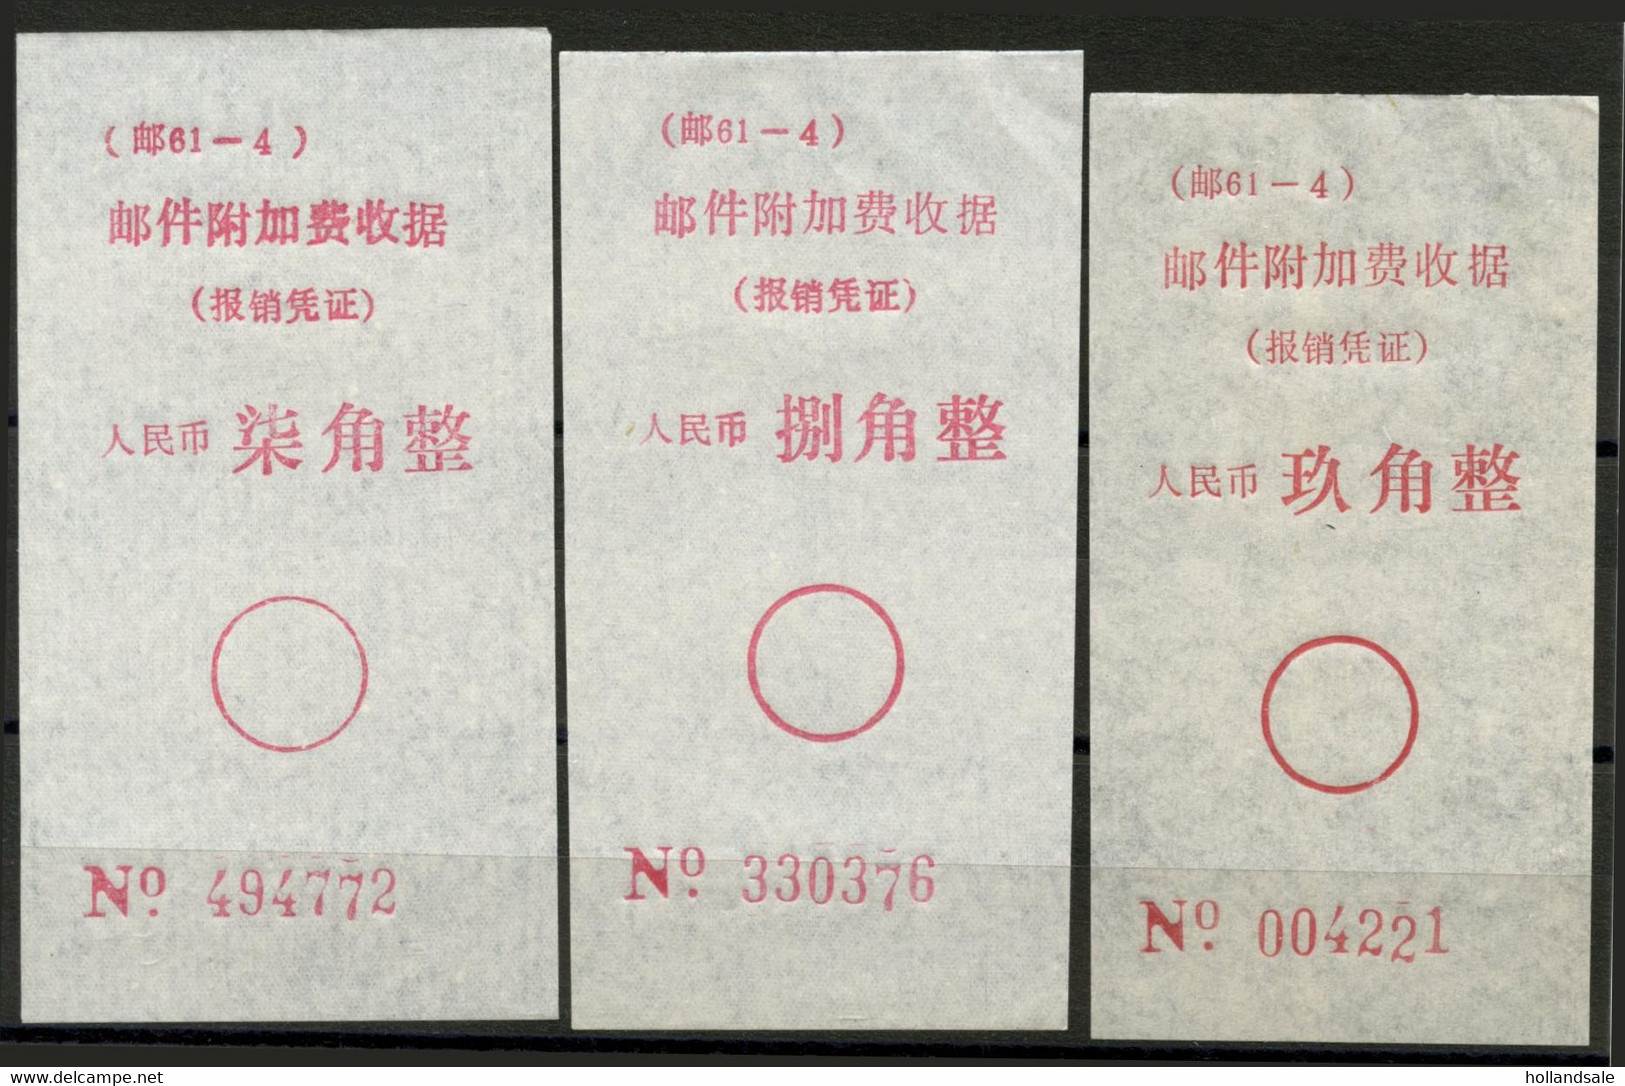 CHINA PRC - ADDED CHARGE LABELS -  70f - 90f Labels Of Huaying City, Sichuan Prov. D&O # 24-0555/24-0557. - Timbres-taxe